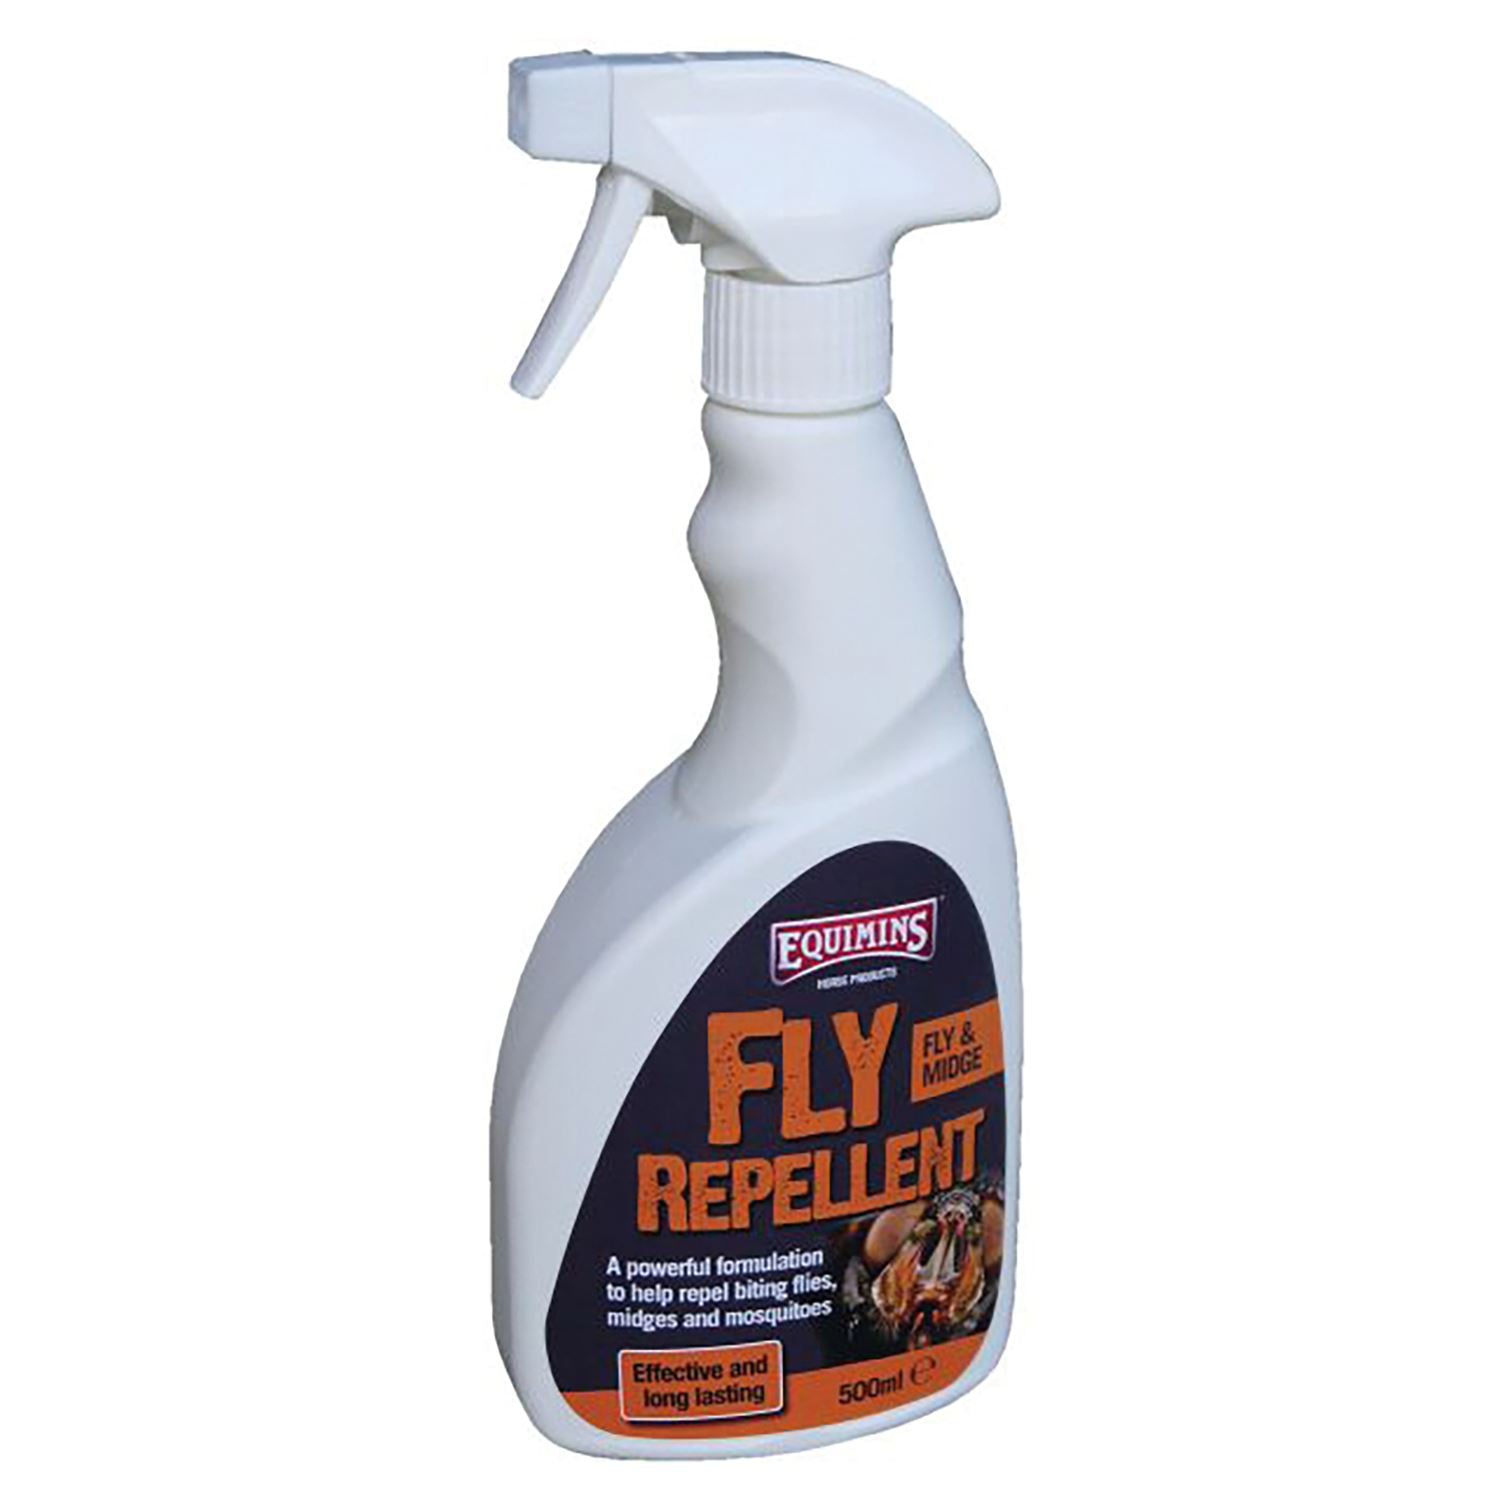 Equimins Fly Repellent Spray - Just Horse Riders